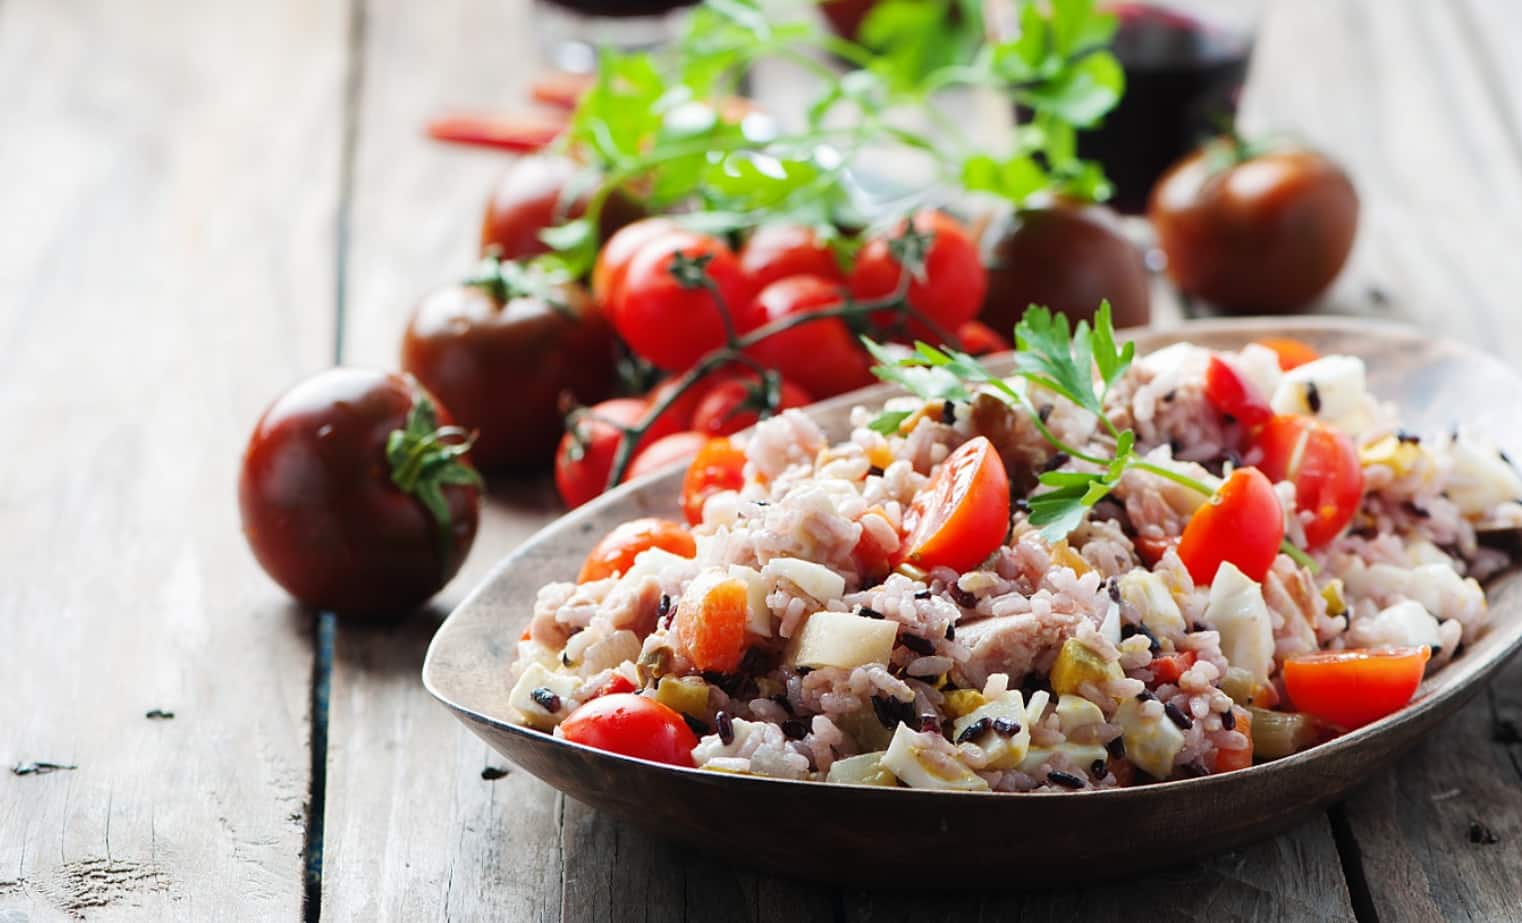 brown-rice-salad-with-vegetables.png